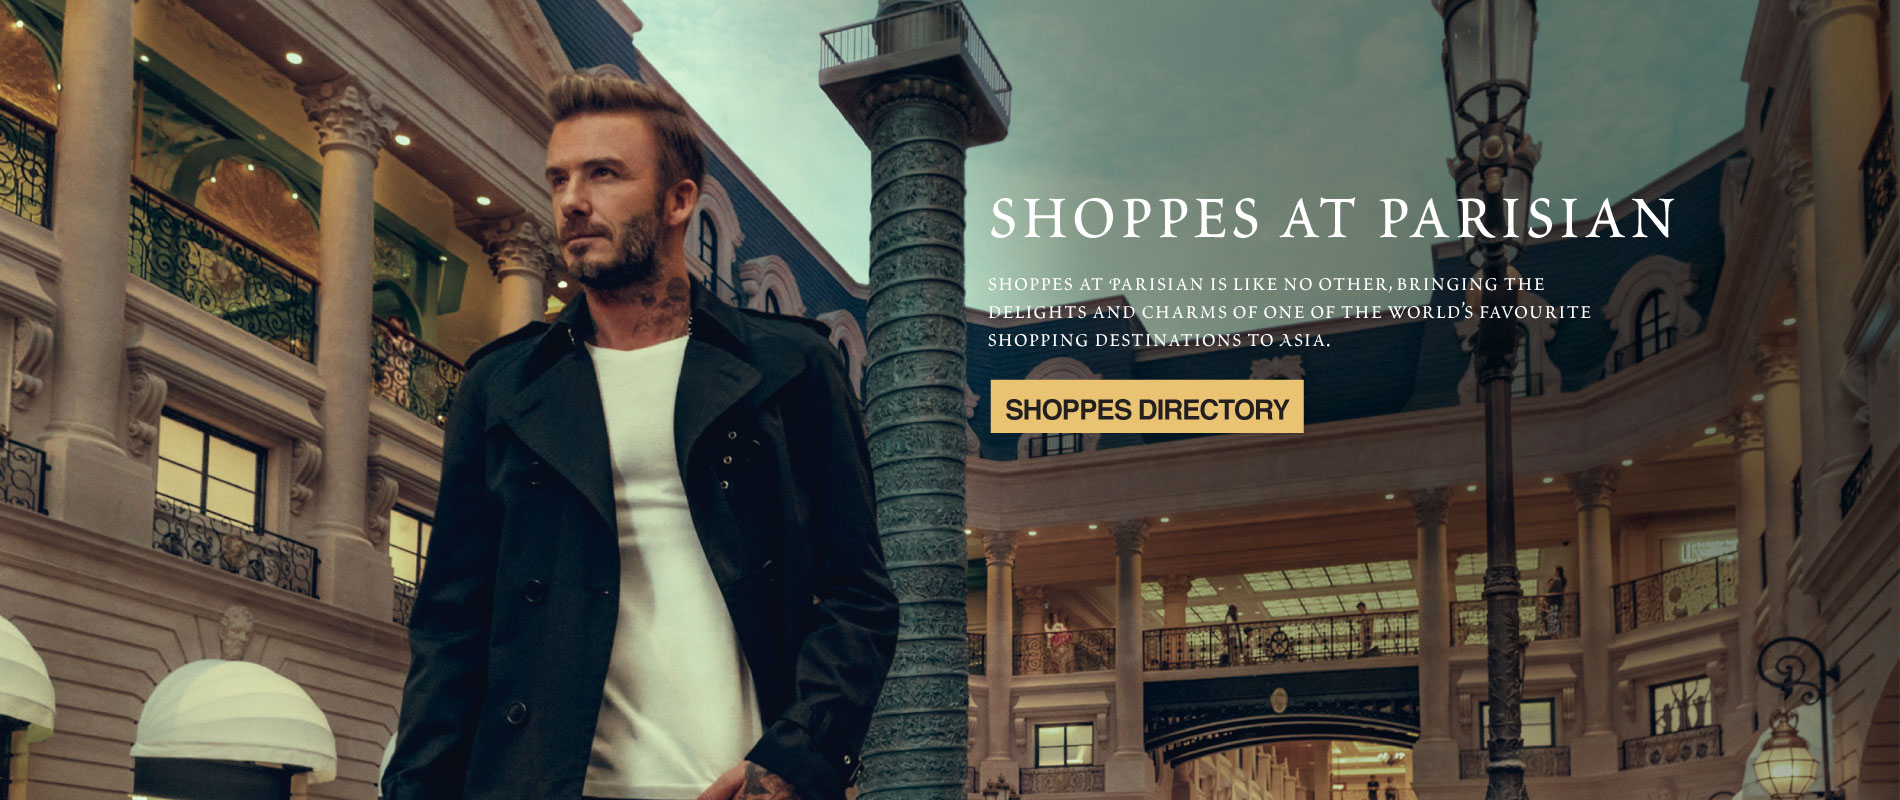 Shoppes Directory